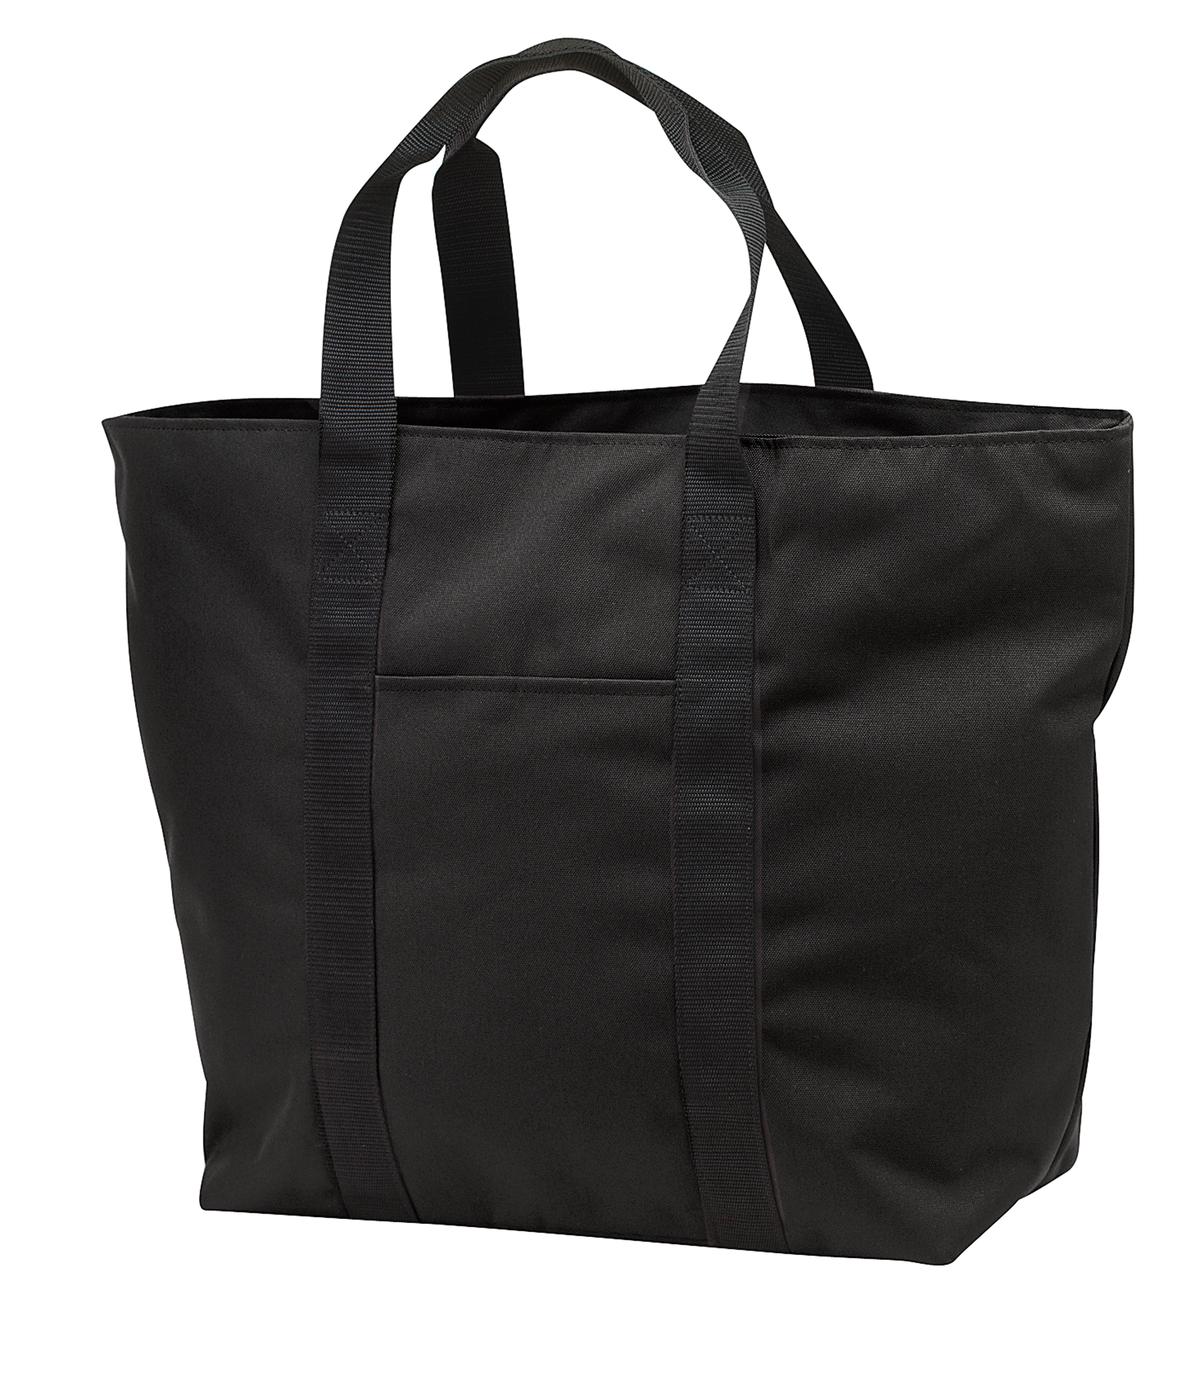 Port Authority Hospitality Bags ® All-Purpose Tote.-Port Authority